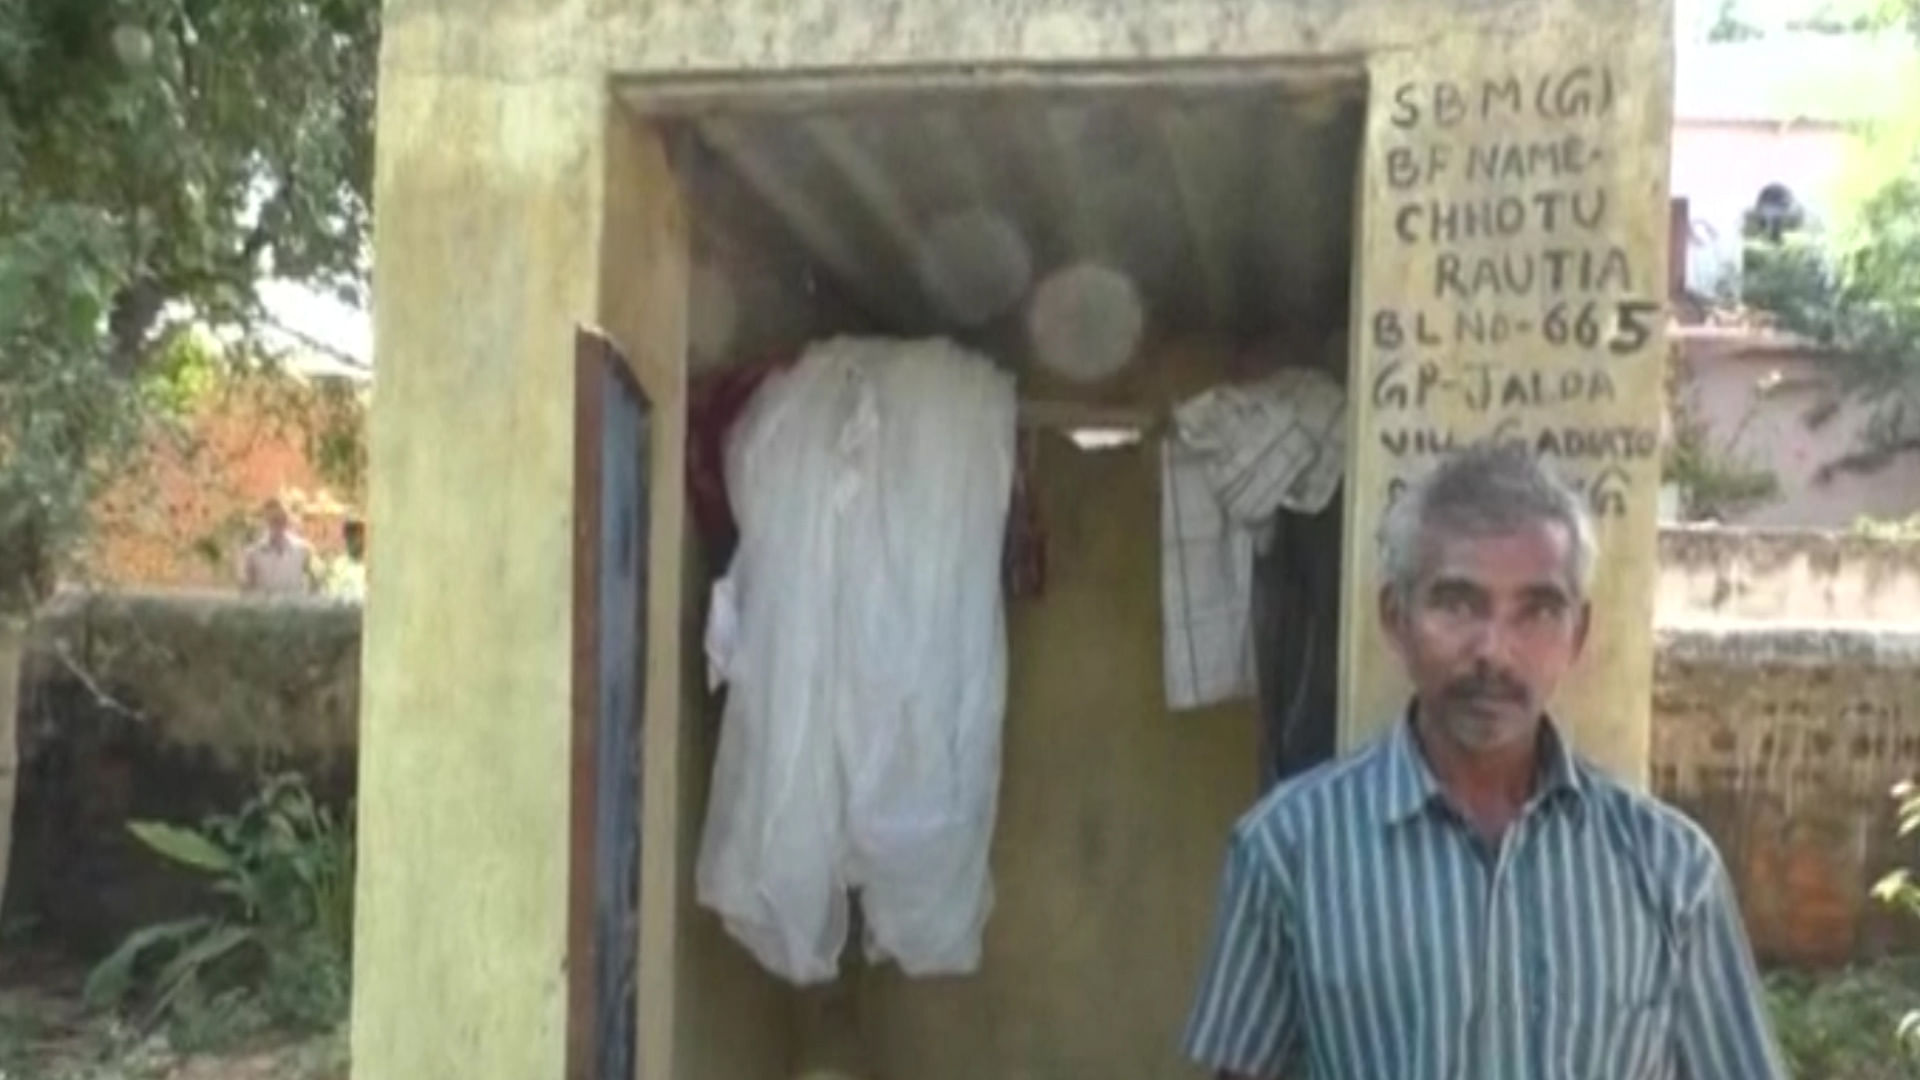 After being denied a home, a man in Odisha starts living in the Swacch toilet.